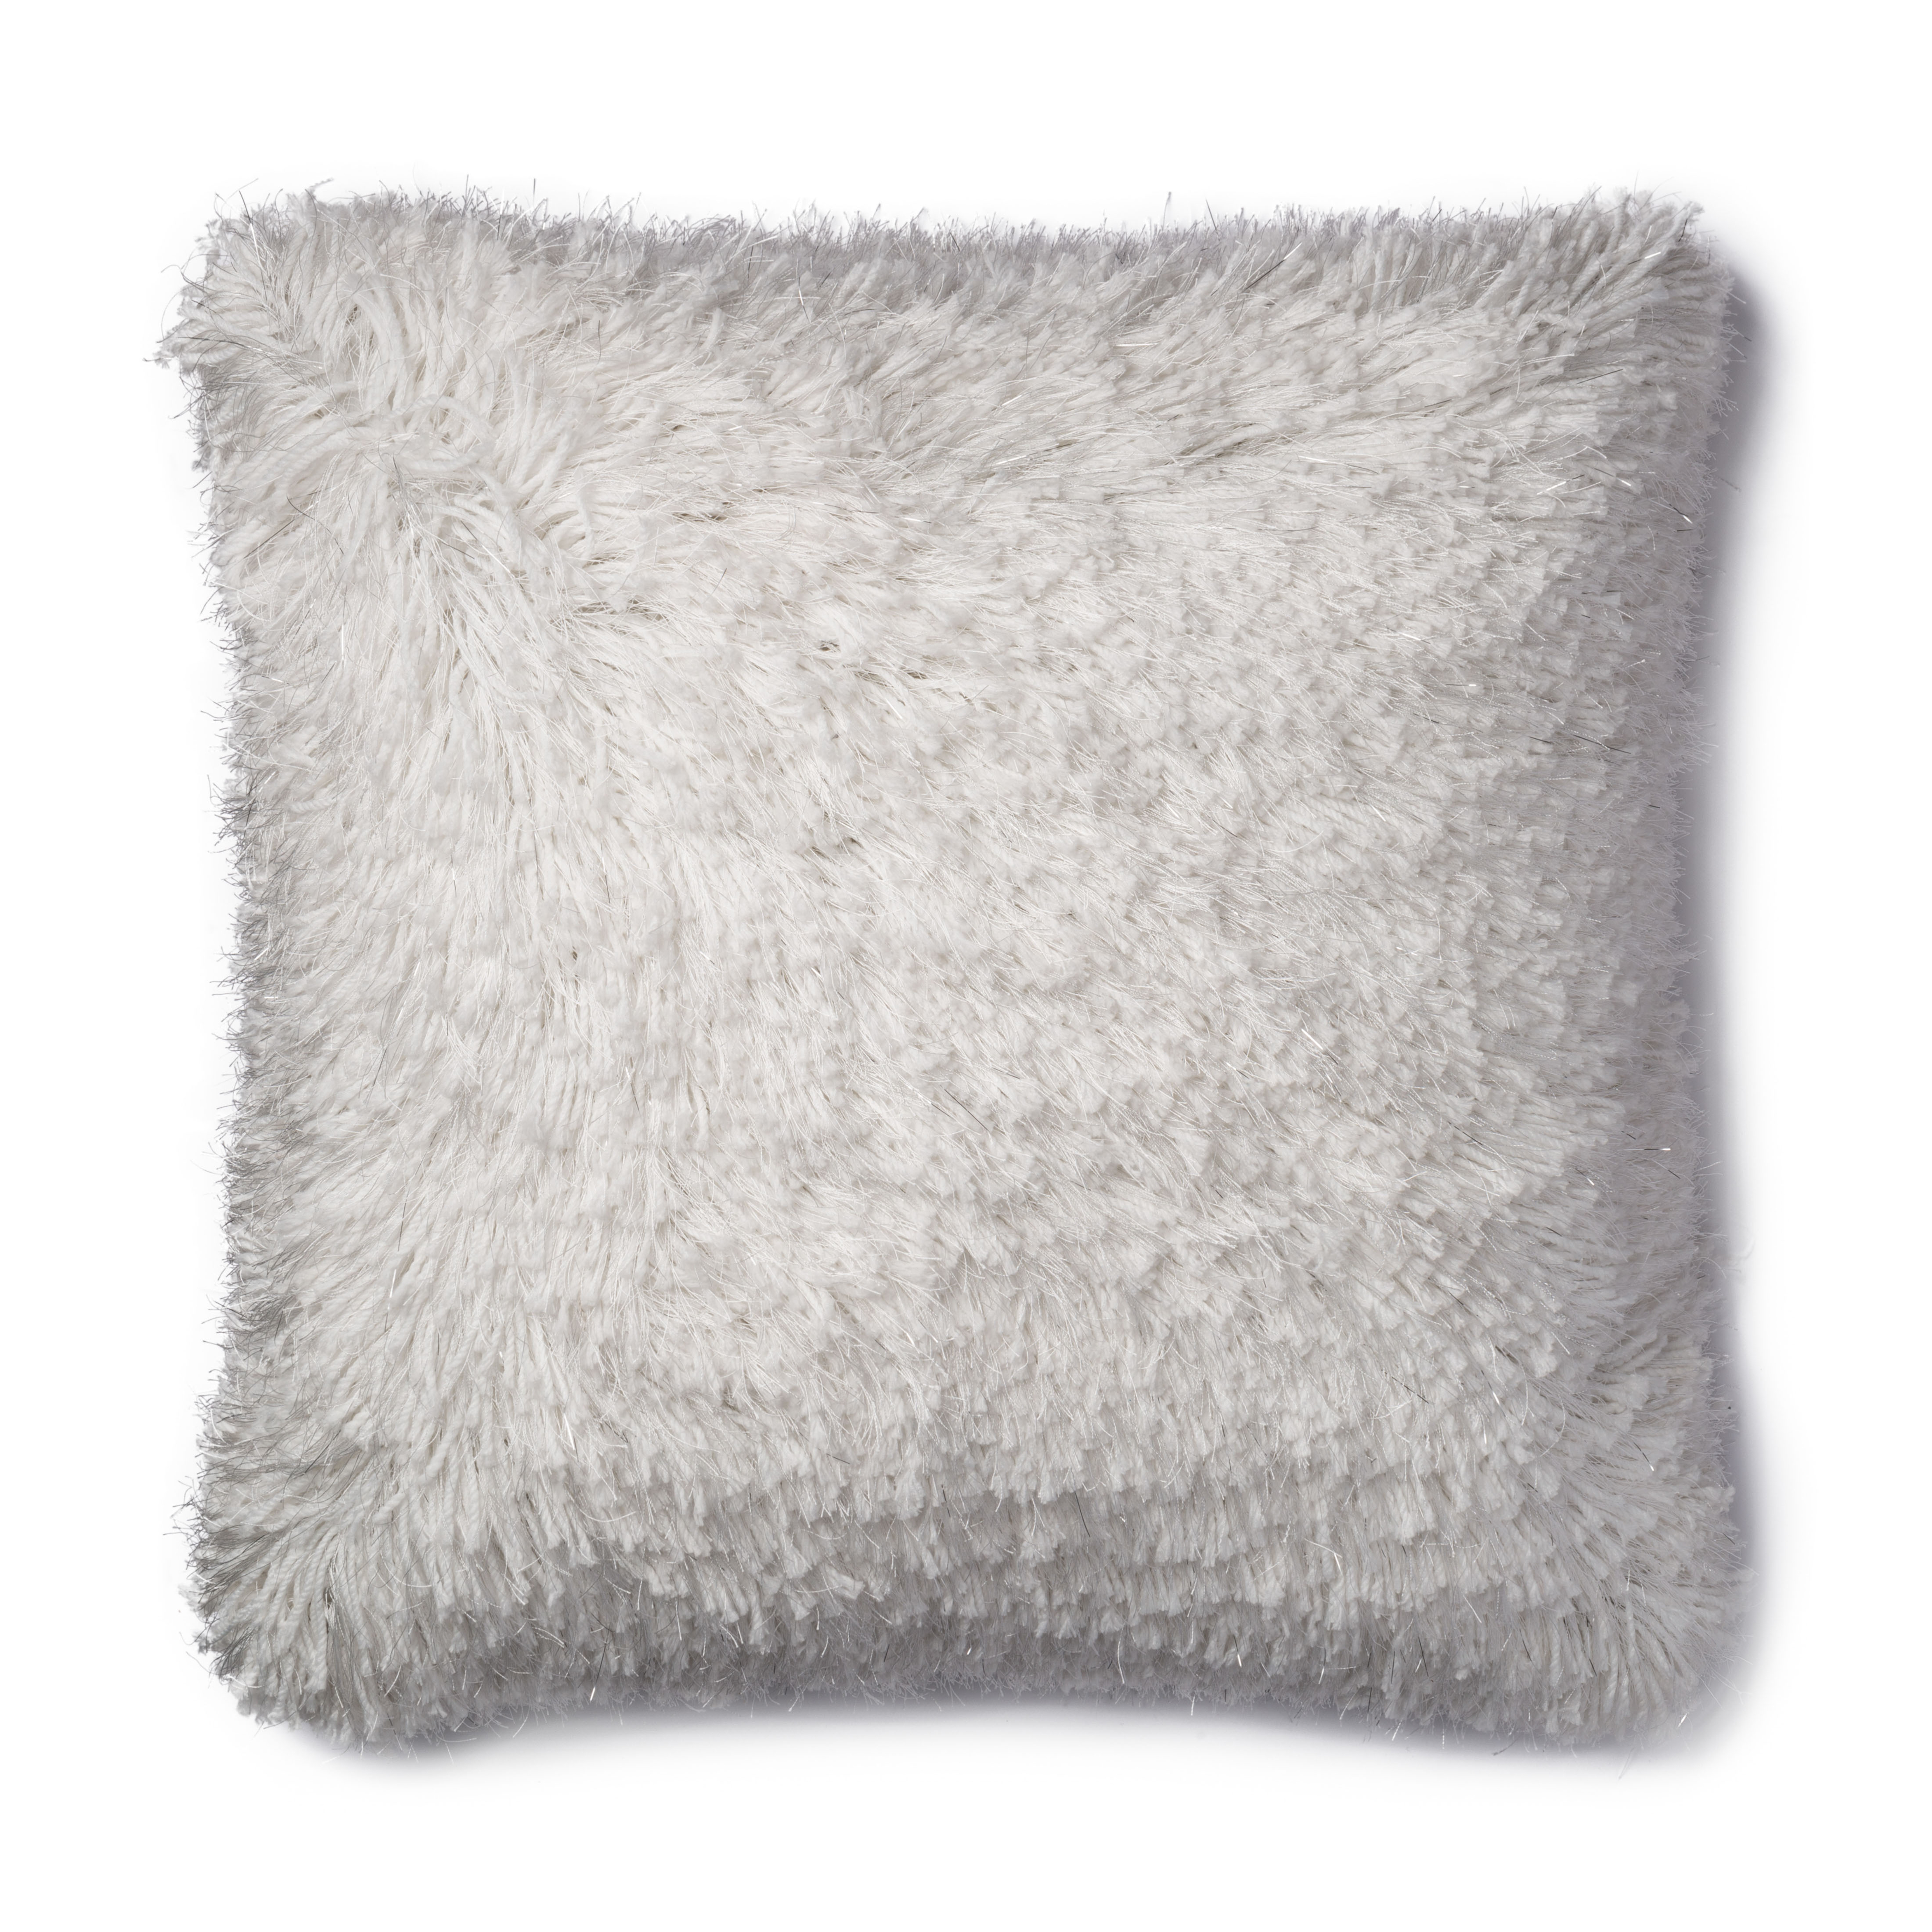 PILLOWS P0470 WHITE 22" x 22" Cover Only - Loloi Rugs